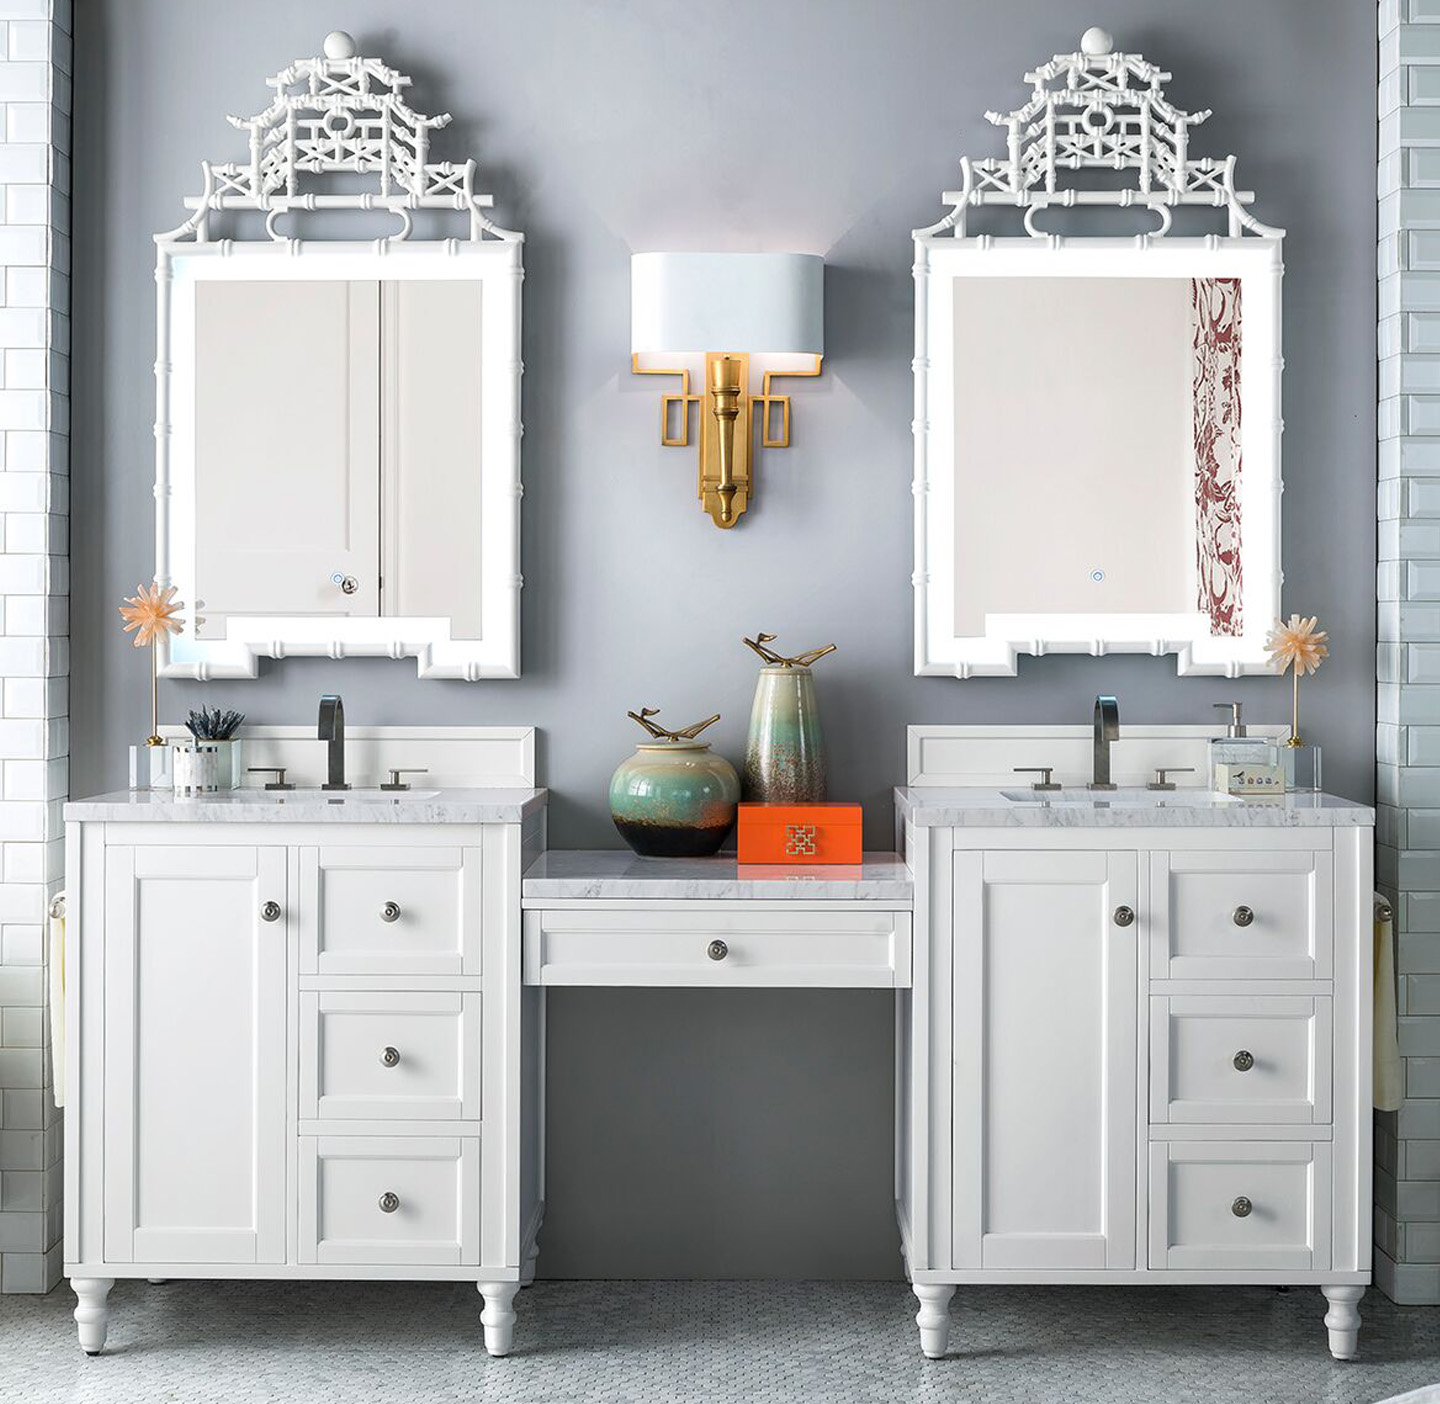 James Martin Copper Cove Encore, Bathroom Vanity With Makeup Table In Middle